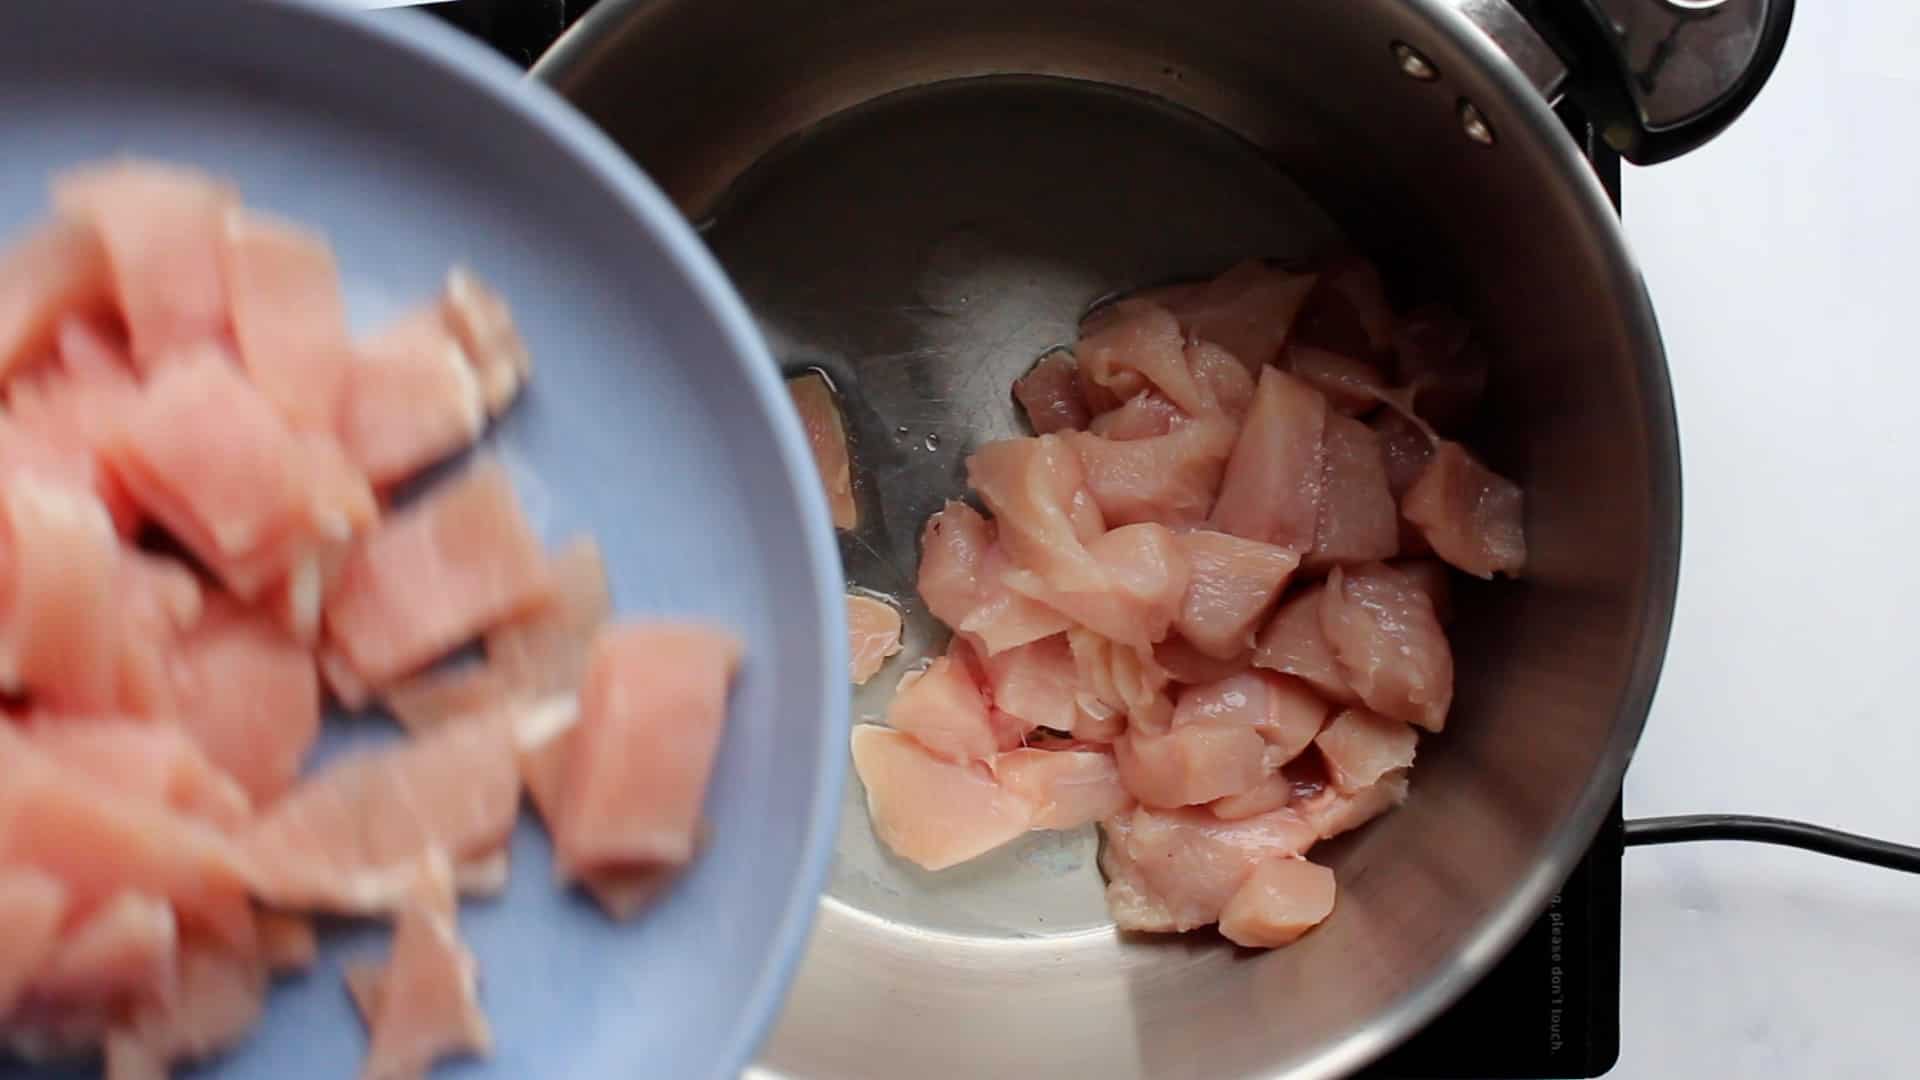 Bacon pieces in a blue bowl added with chicken in a saucepan on the stove.